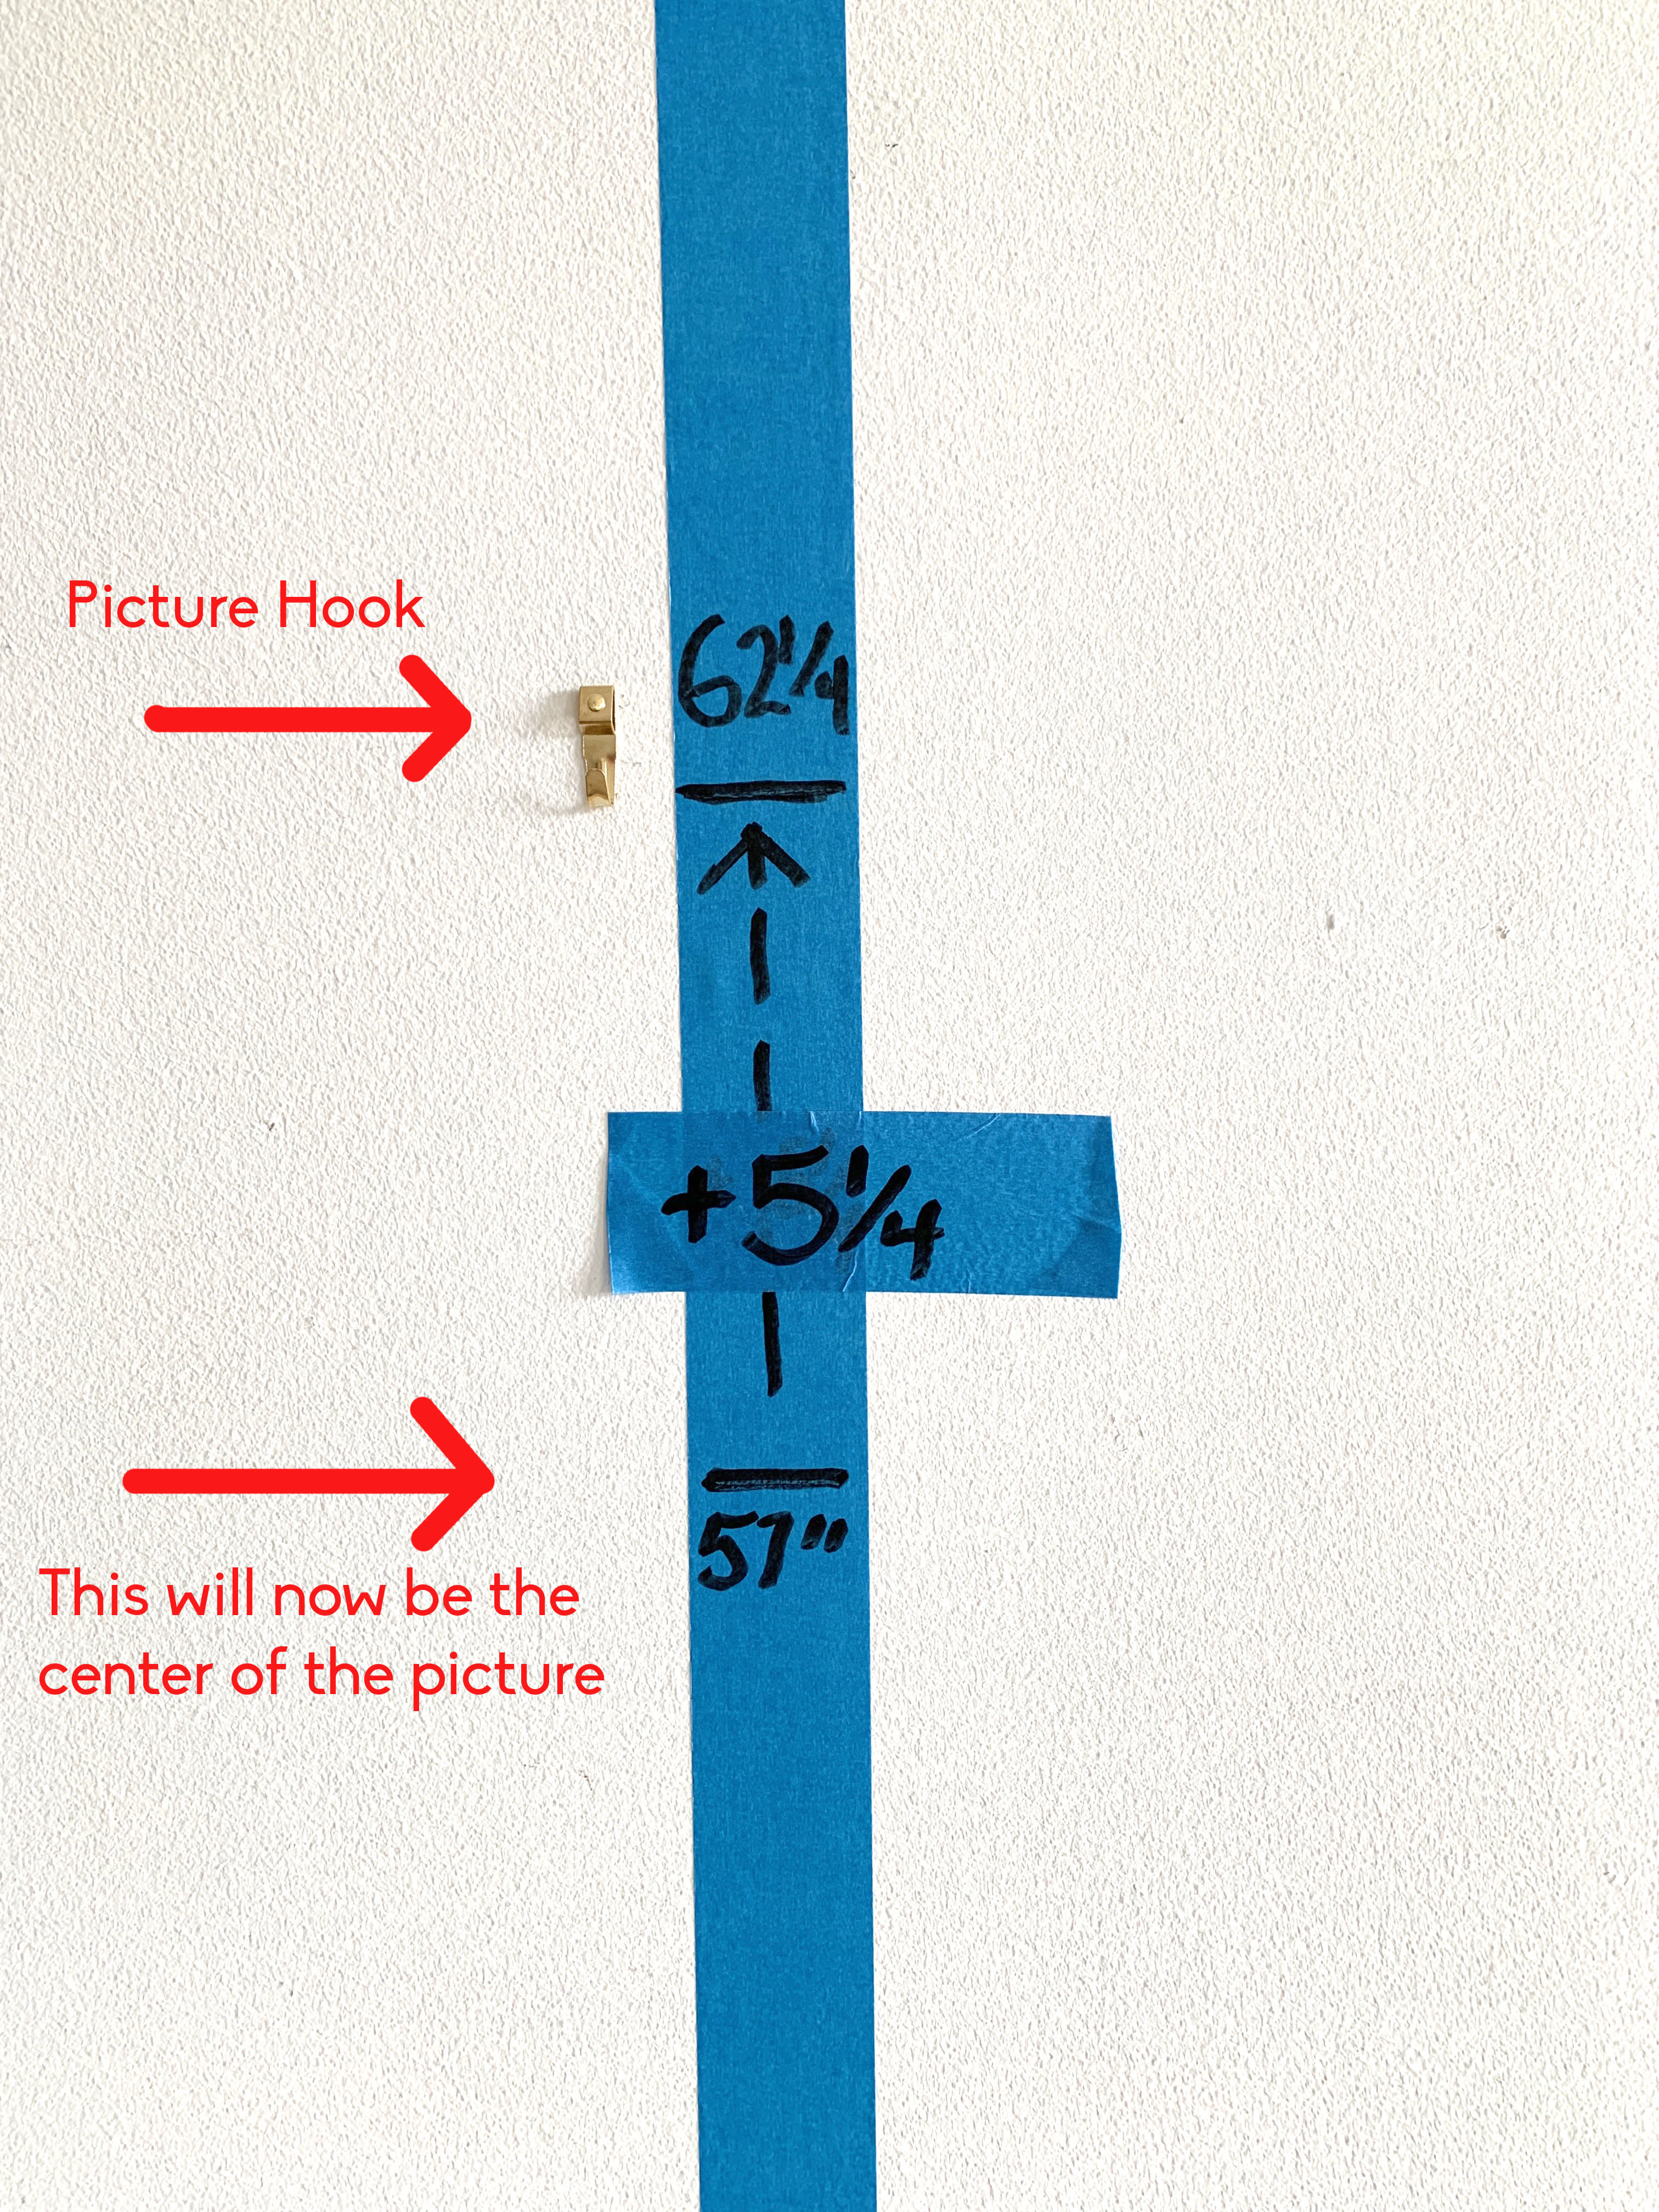 Hack shows how to hang a picture perfectly without a measuring